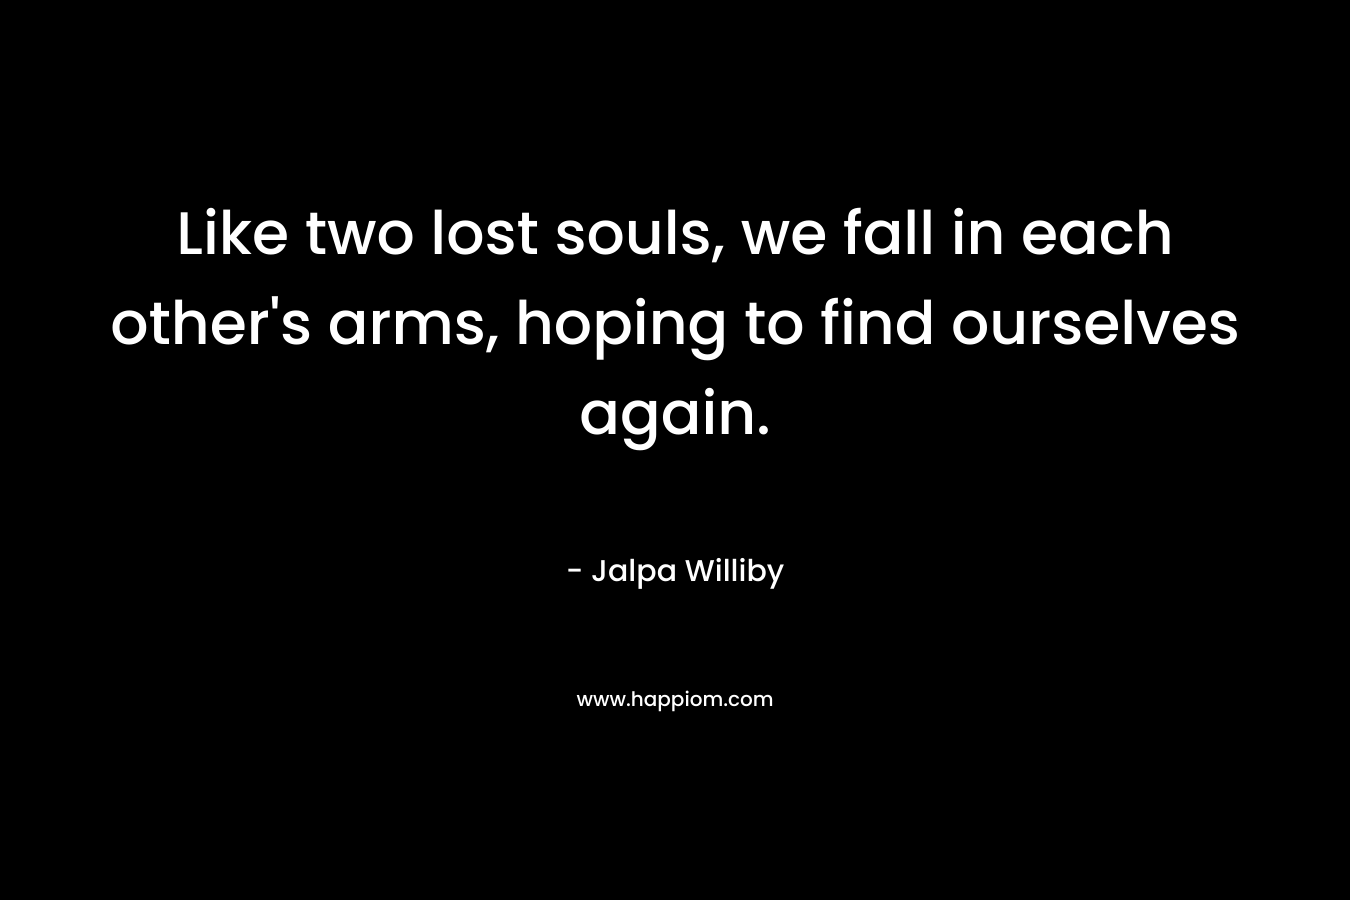 Like two lost souls, we fall in each other's arms, hoping to find ourselves again.